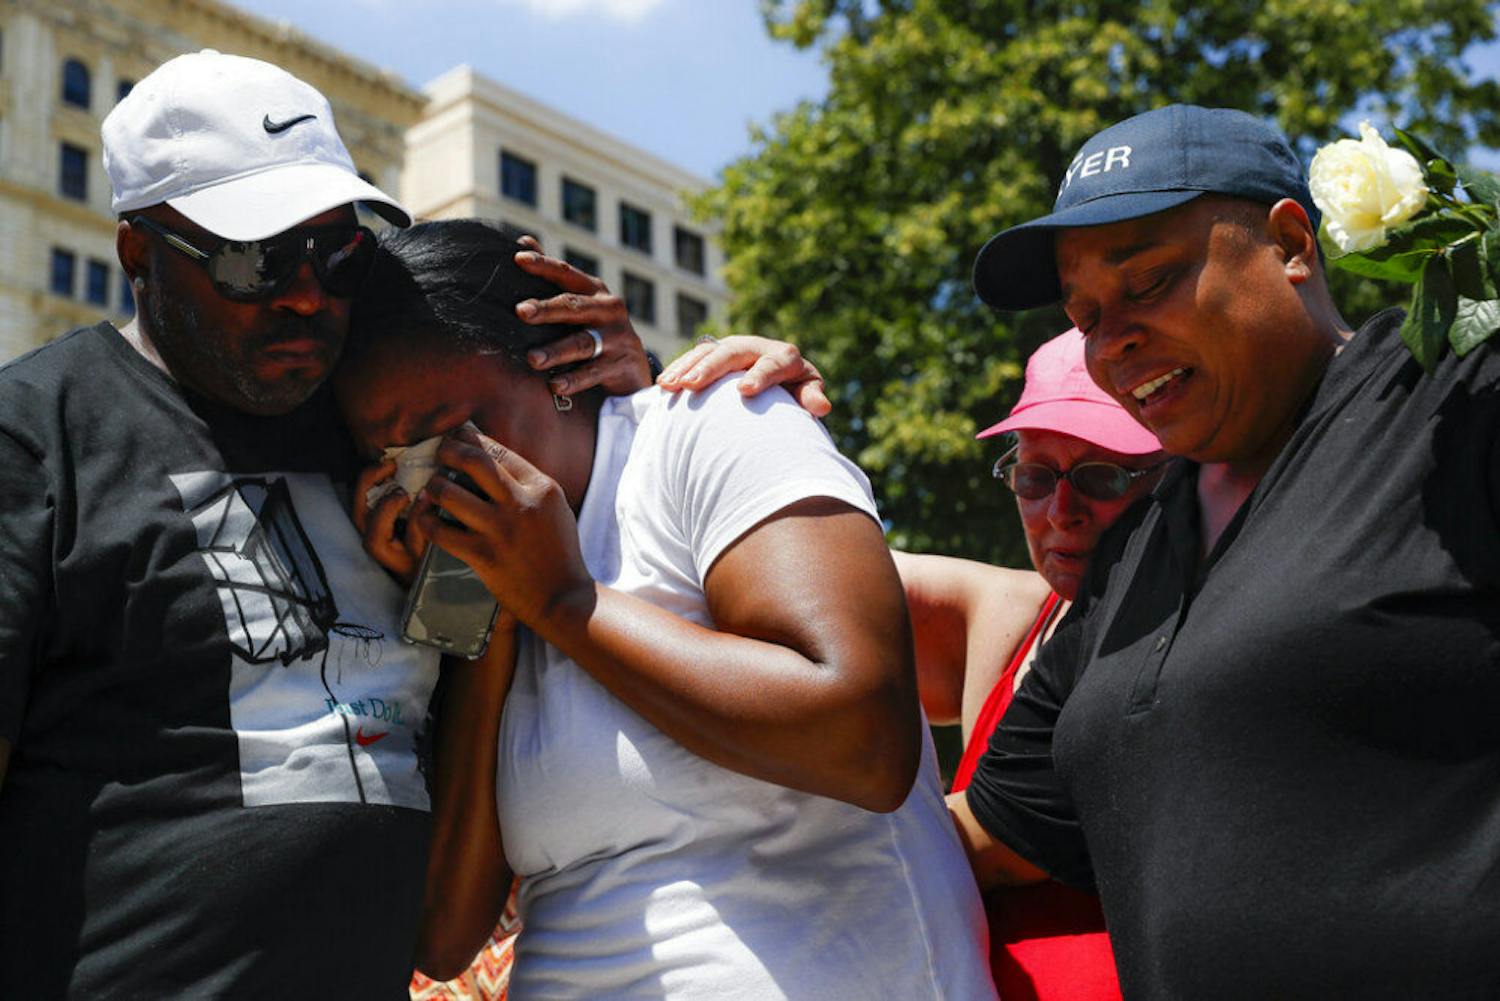 Mourners gather at a vigil following a nearby mass shooting, Sunday, Aug. 4, 2019, in Dayton, Ohio. Multiple people in Ohio have been killed in the second mass shooting in the U.S. in less than 24 hours, and the suspected shooter is also deceased, police said.&nbsp;